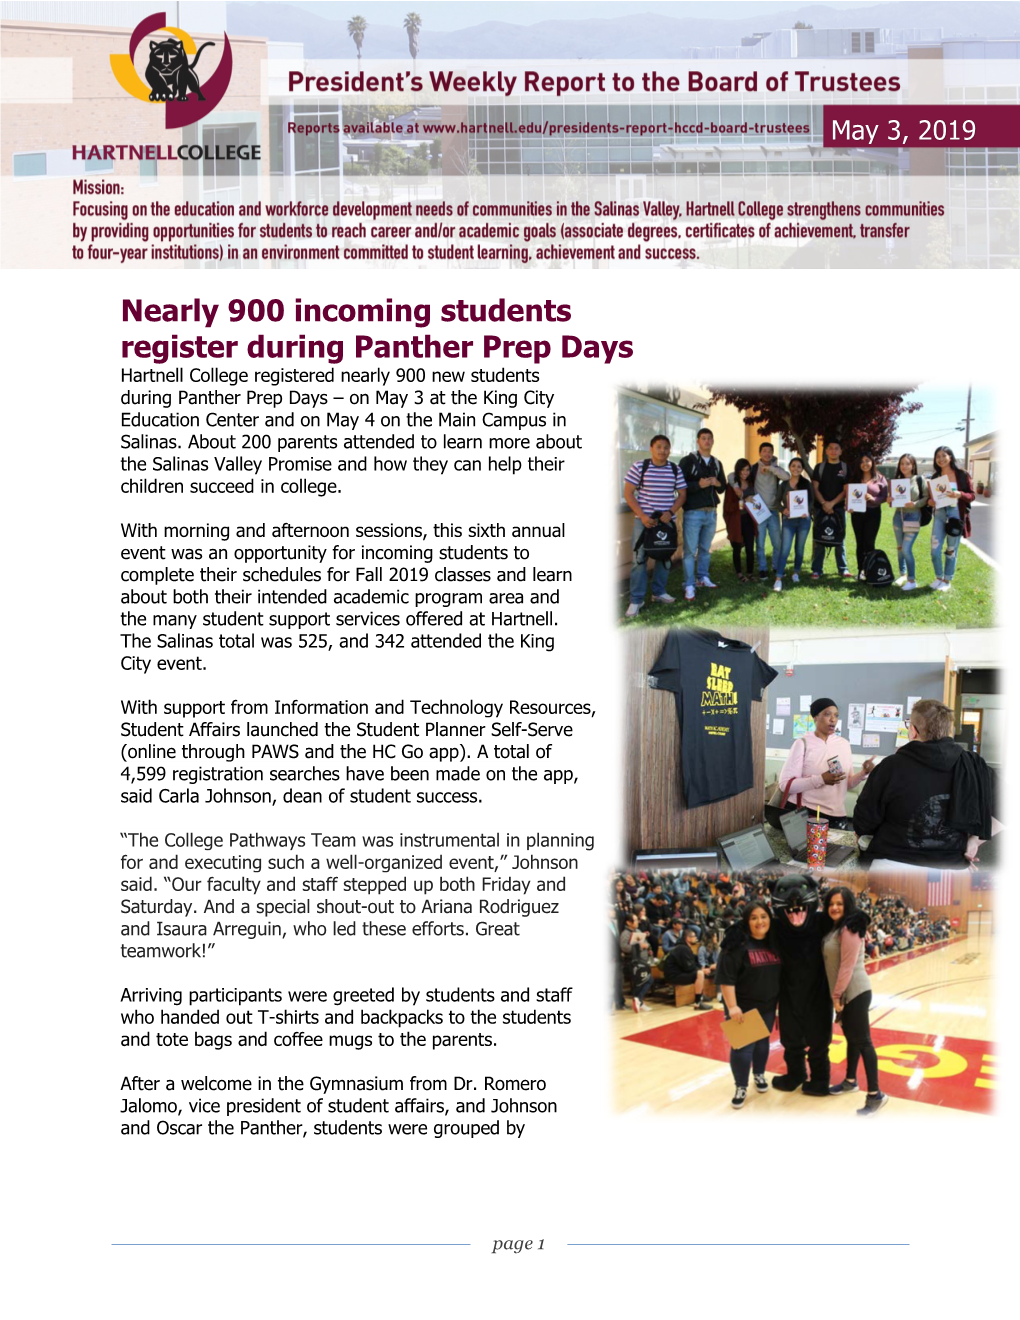 Nearly 900 Incoming Students Register During Panther Prep Days